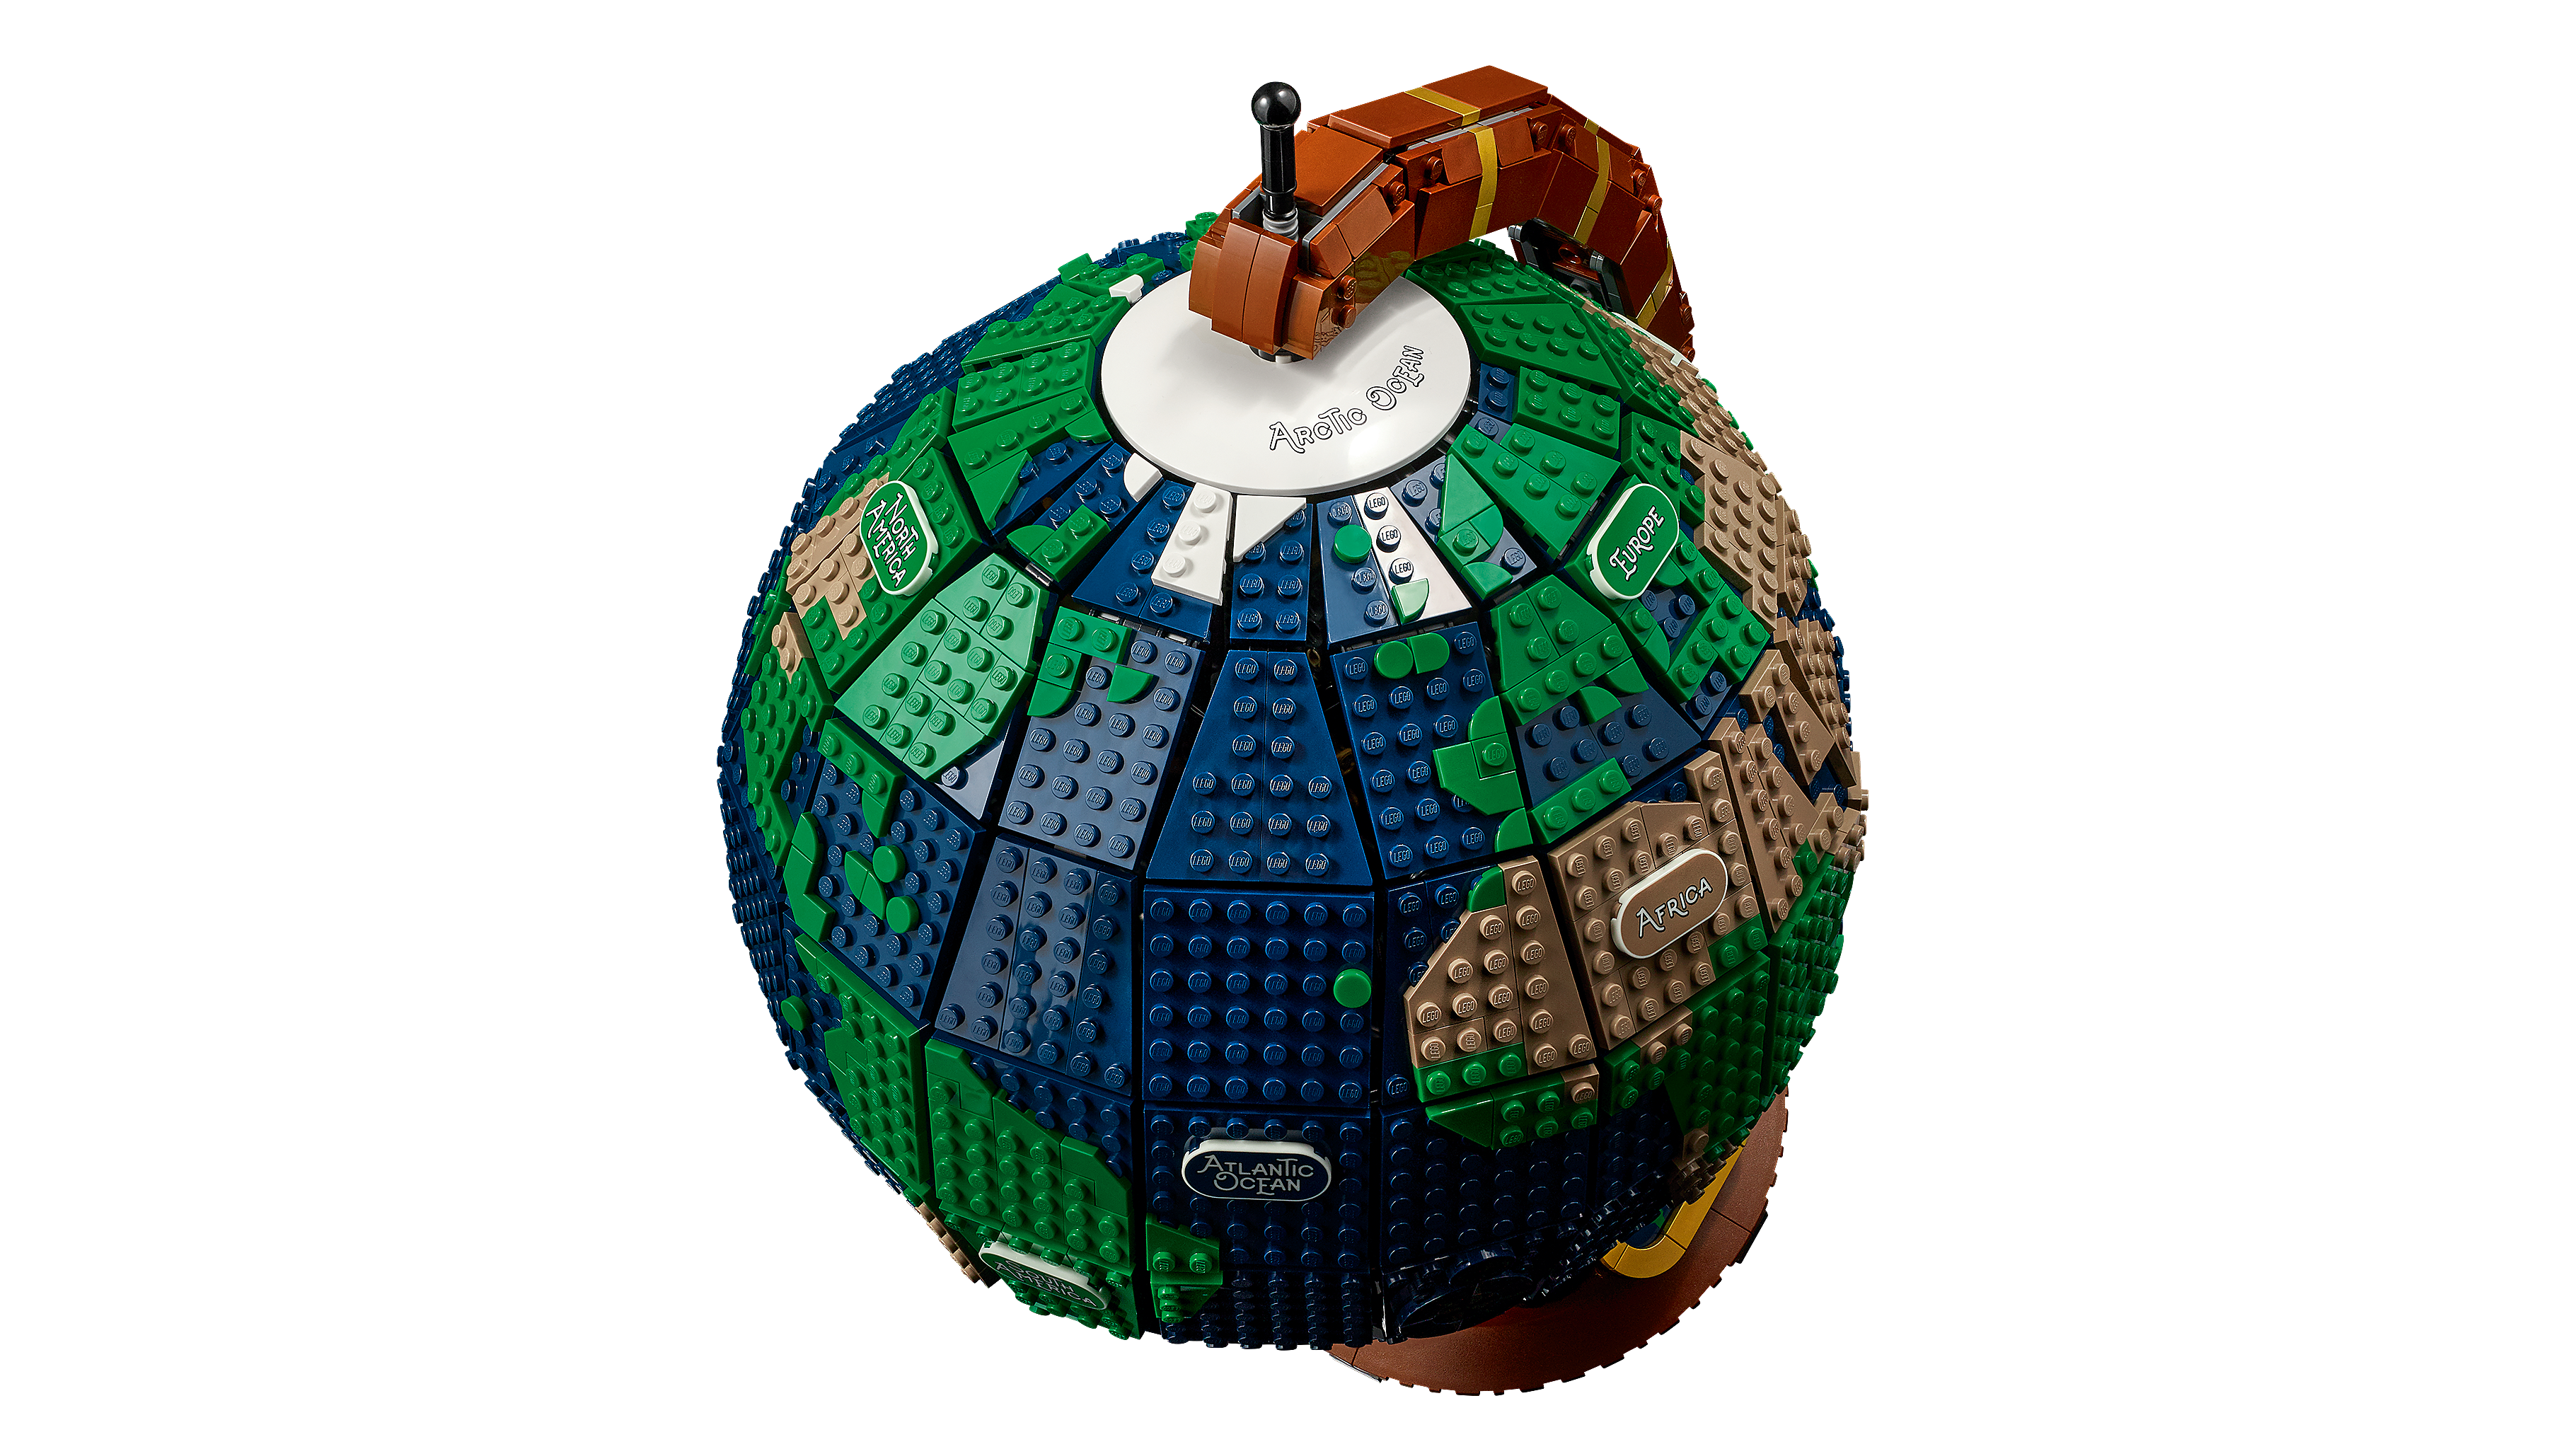 LEGO Globe: Hands-on with an out of this world set - 9to5Toys